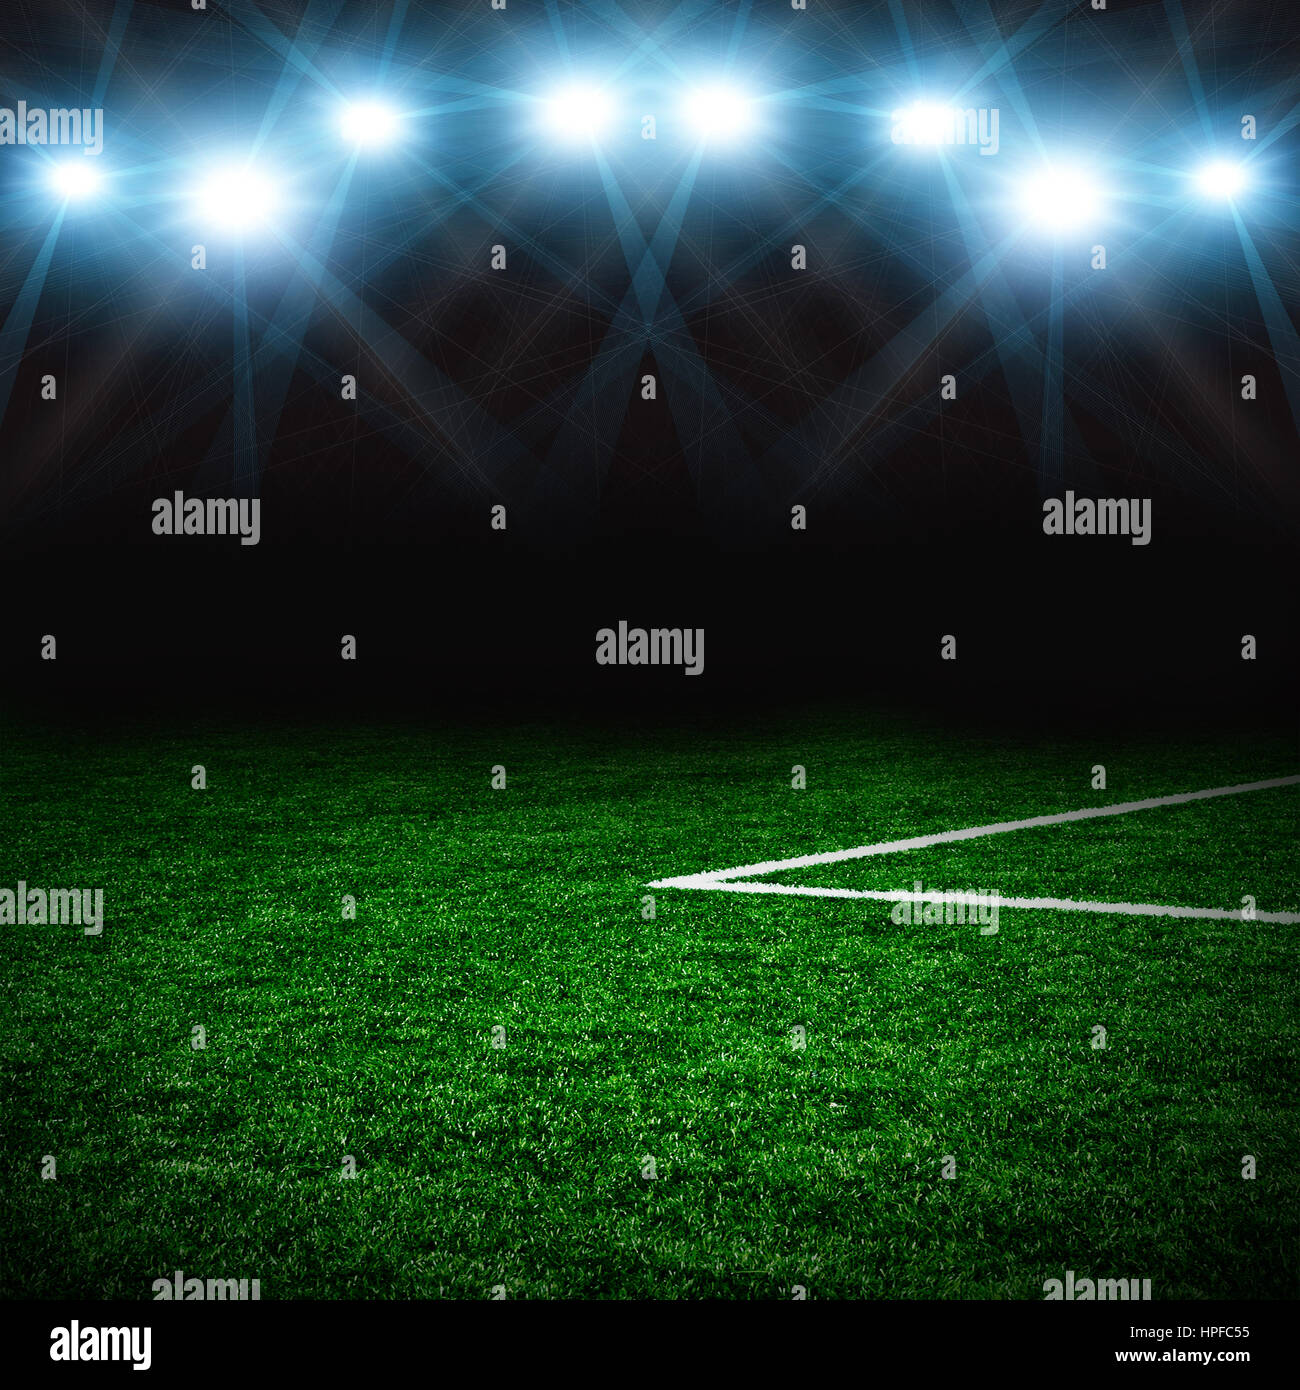 Template For Soccer Stadium Background Stock Photo Alamy